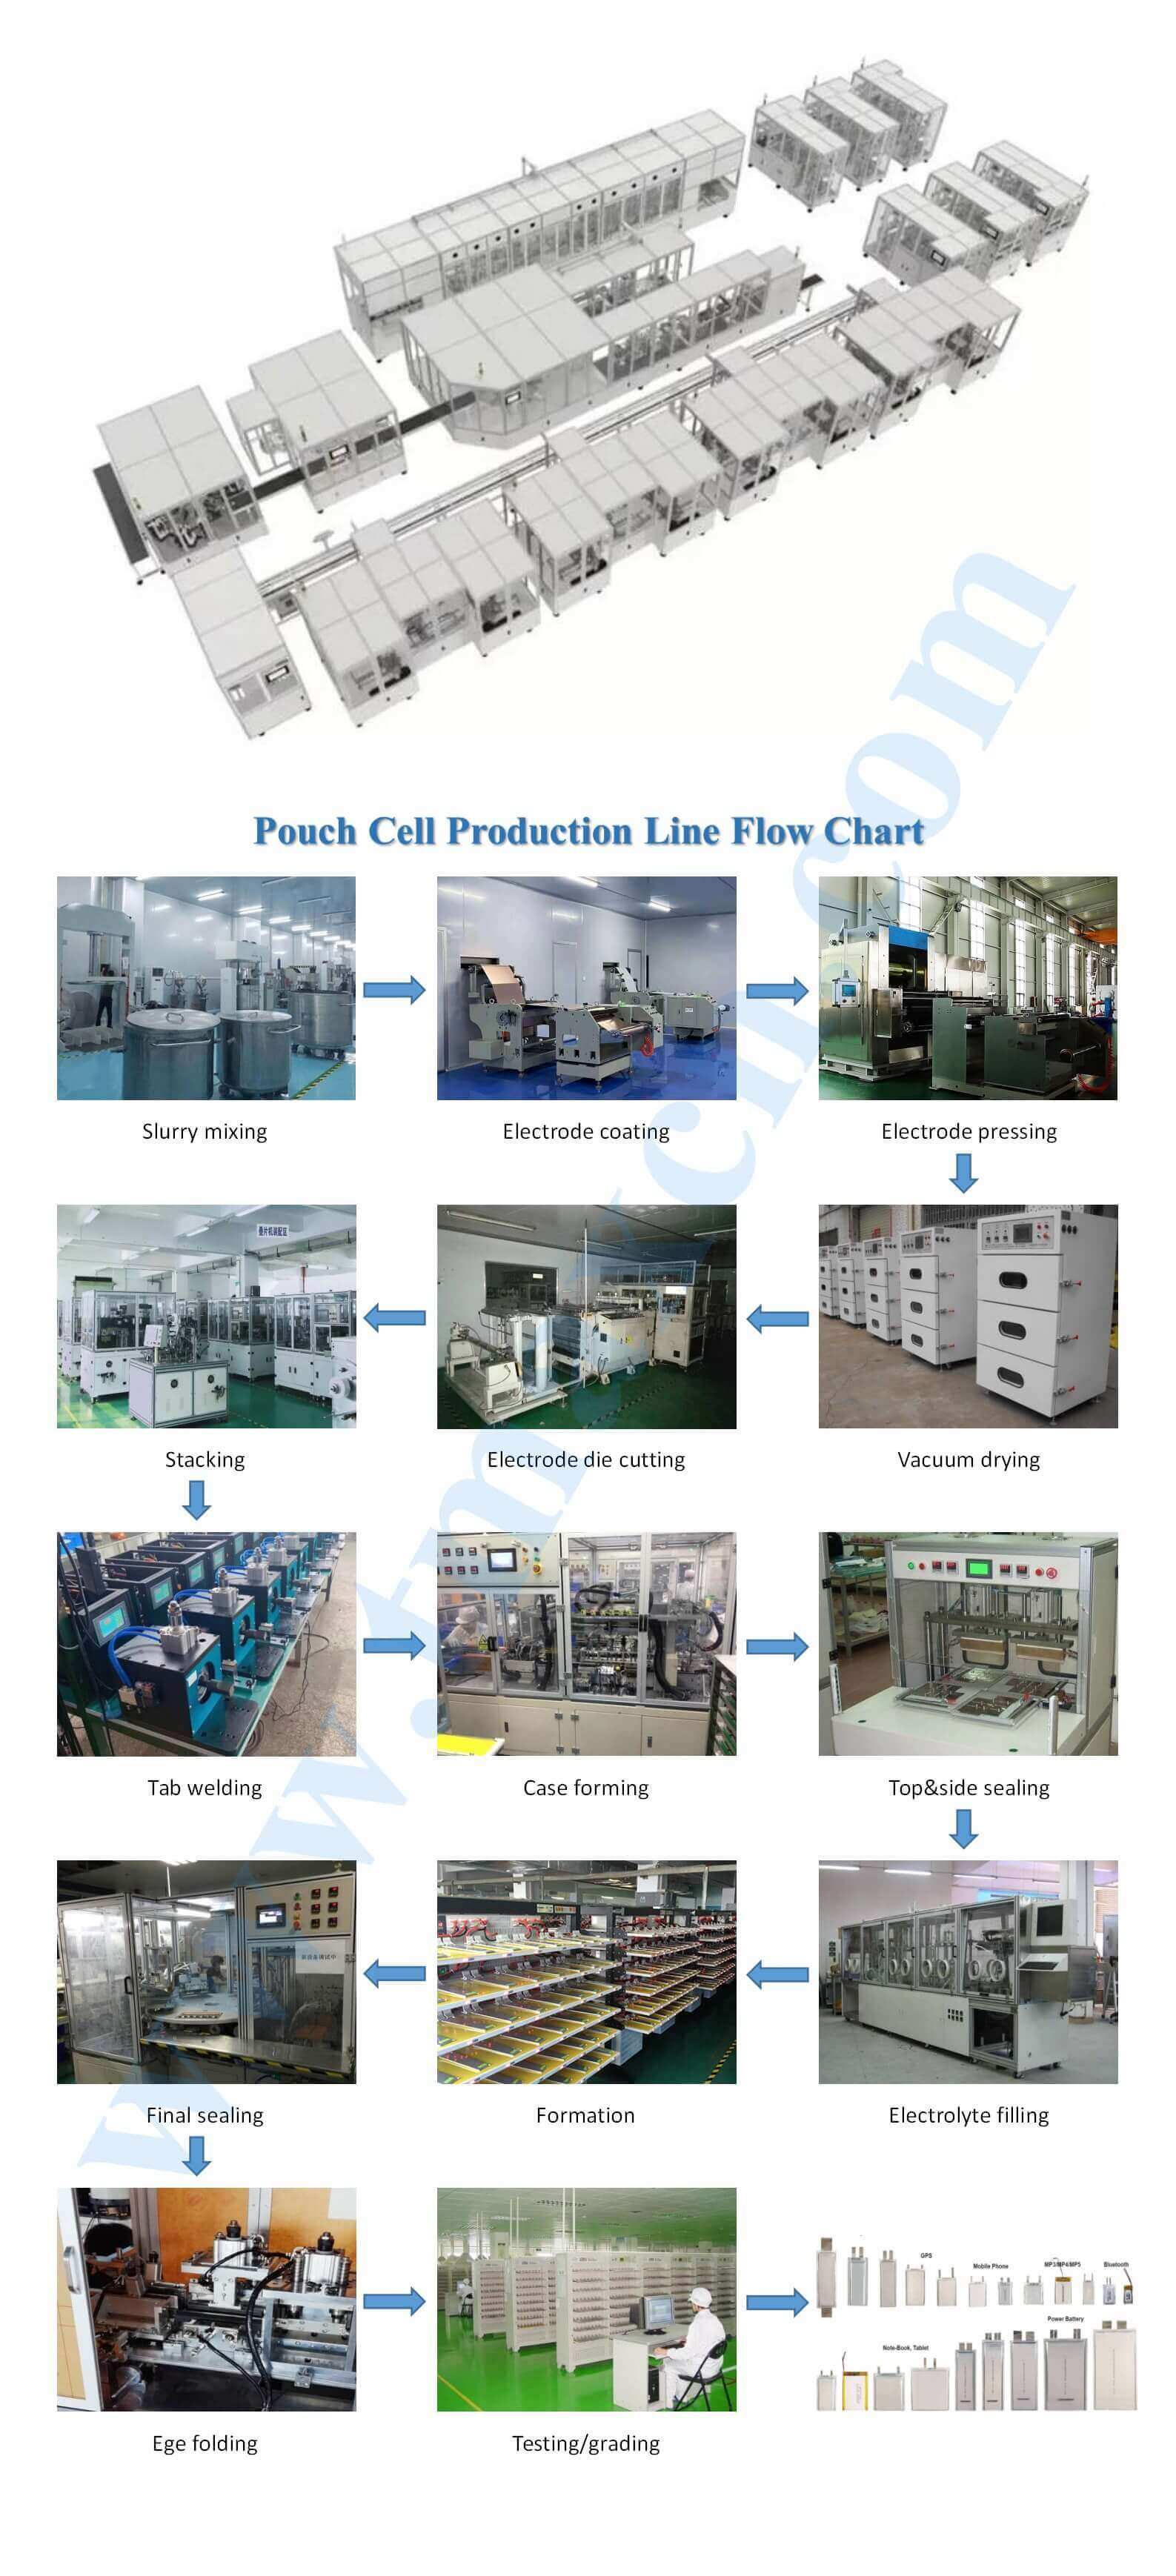 pouch cell manufacturing line